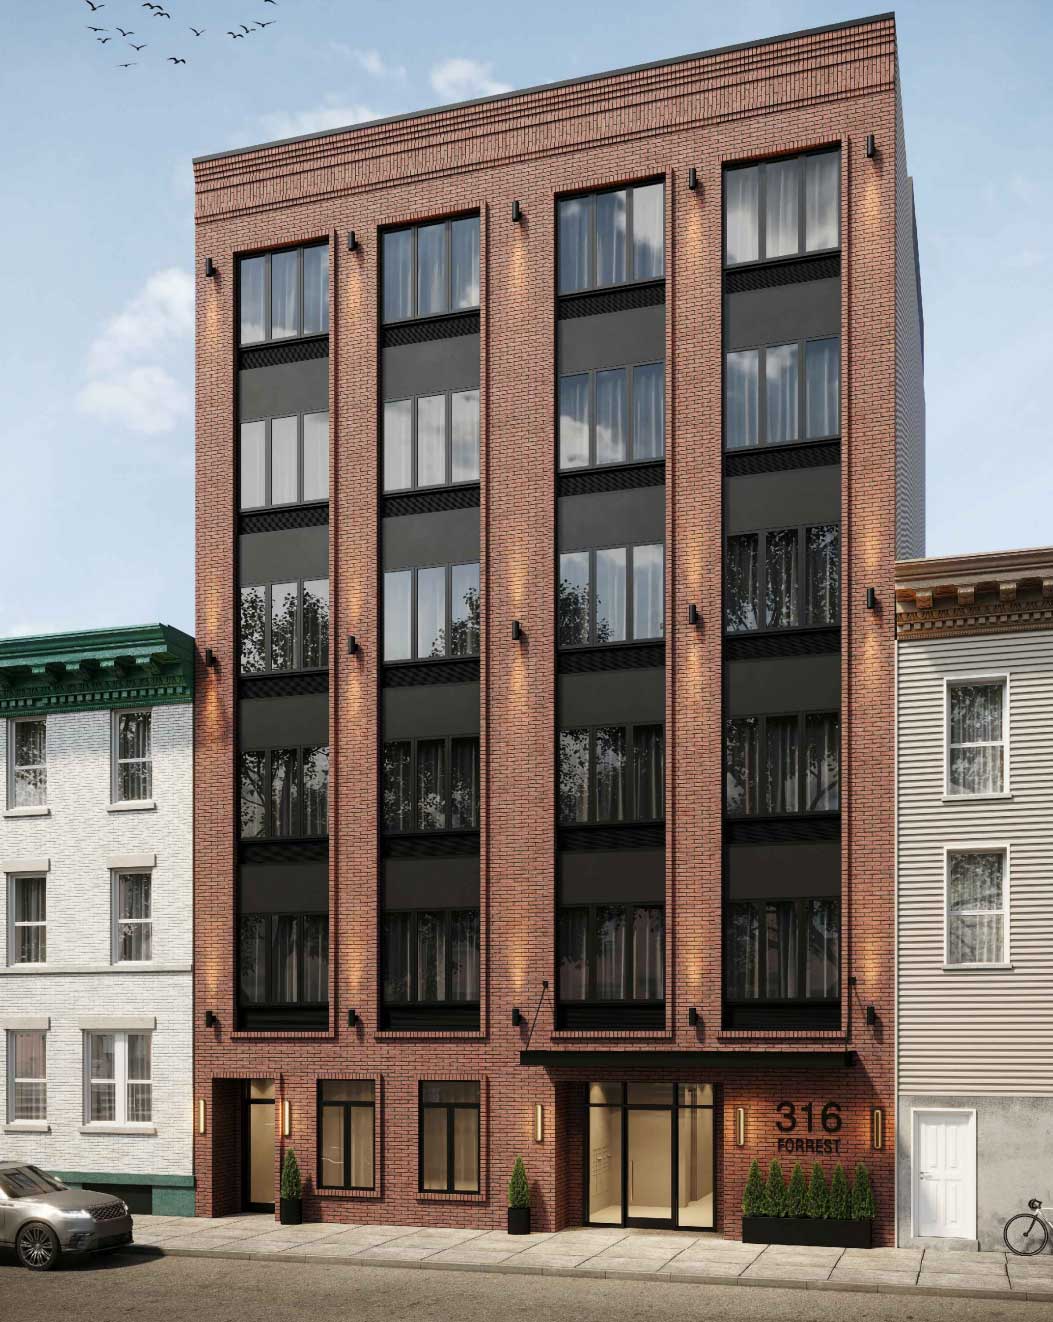 316 Forrest Jersey City Rendering